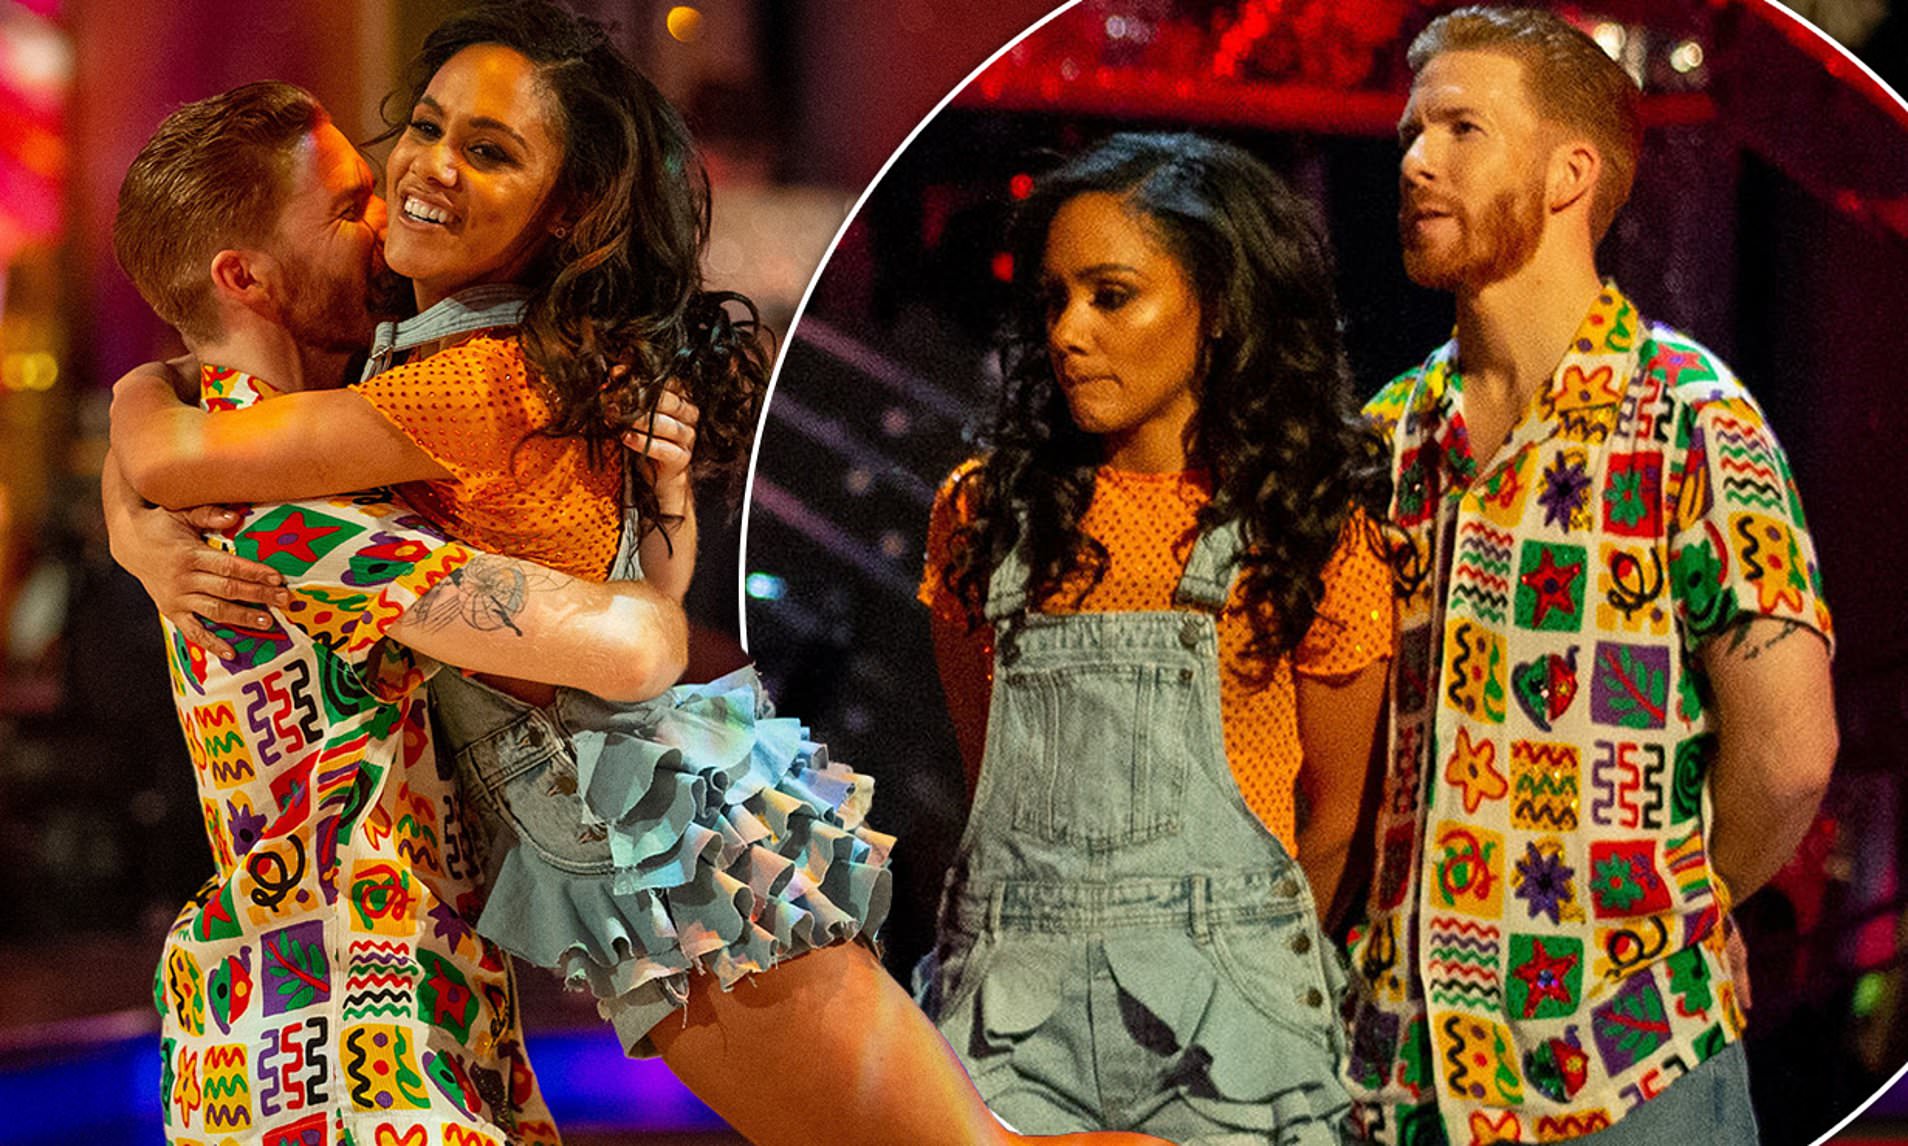 Strictly Come Dancing: Viewers brand show a ‘FIX’ as Alex Scott and partner Neil Jones are sent home after technical glitch causes voting problems